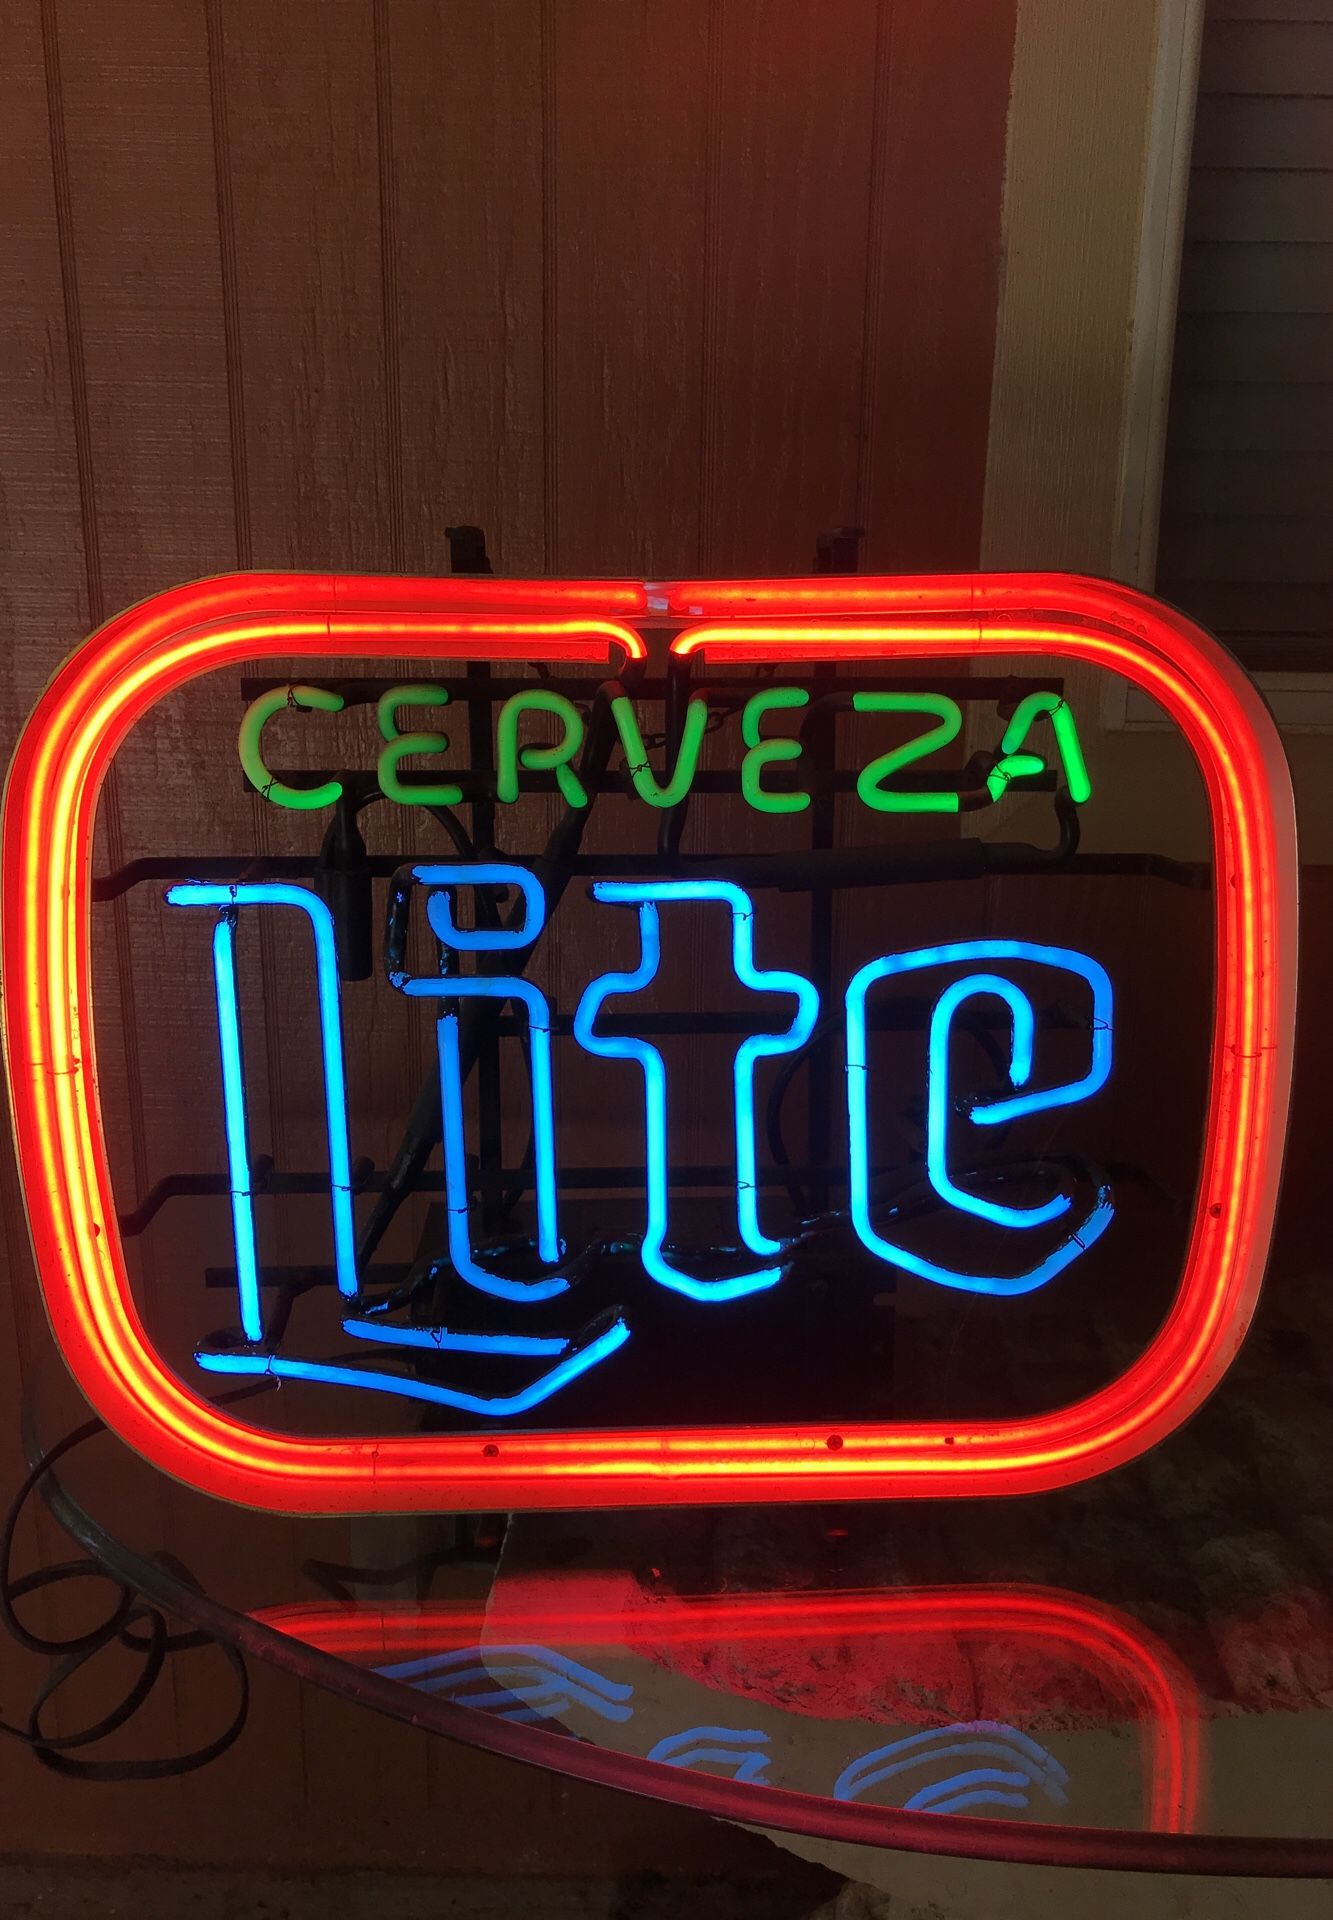 Rare Dr Pepper cup Neon Sign for Sale in San Antonio, TX - OfferUp